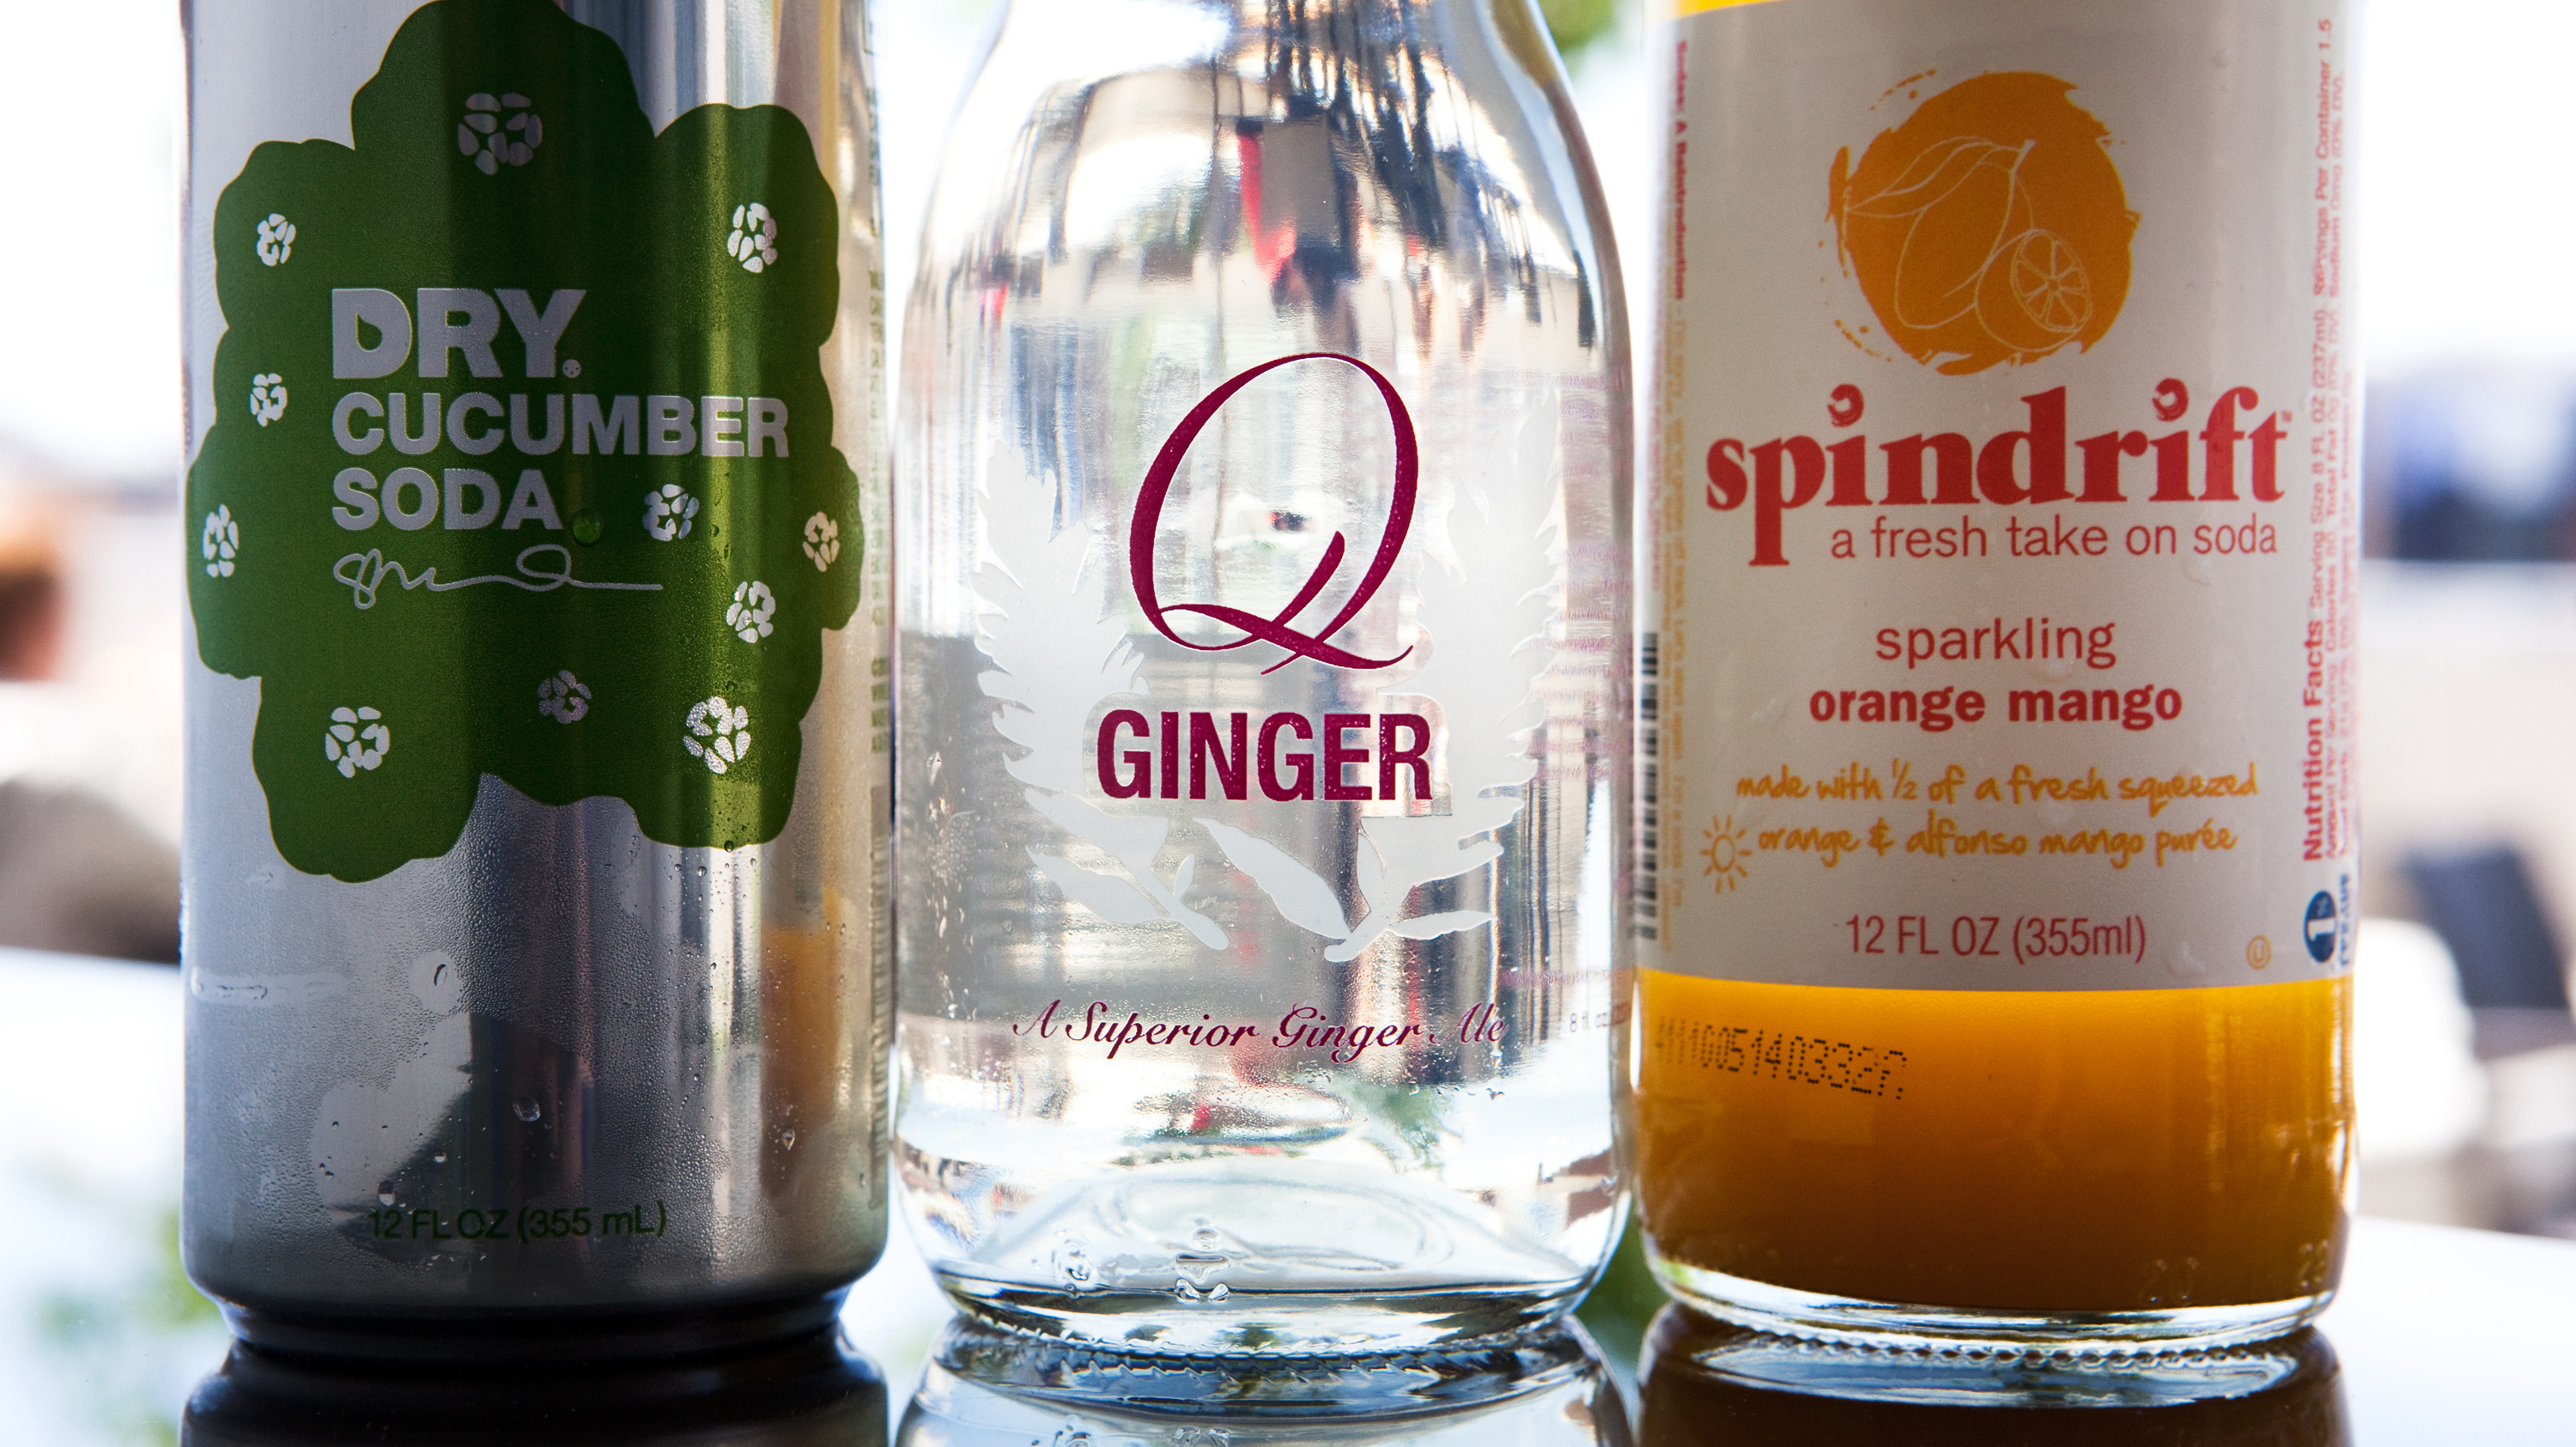 Dry Soda, Q Drinks and Spindrift are a few of the sodas we tried. Photo: Maggie Starbard/NPR